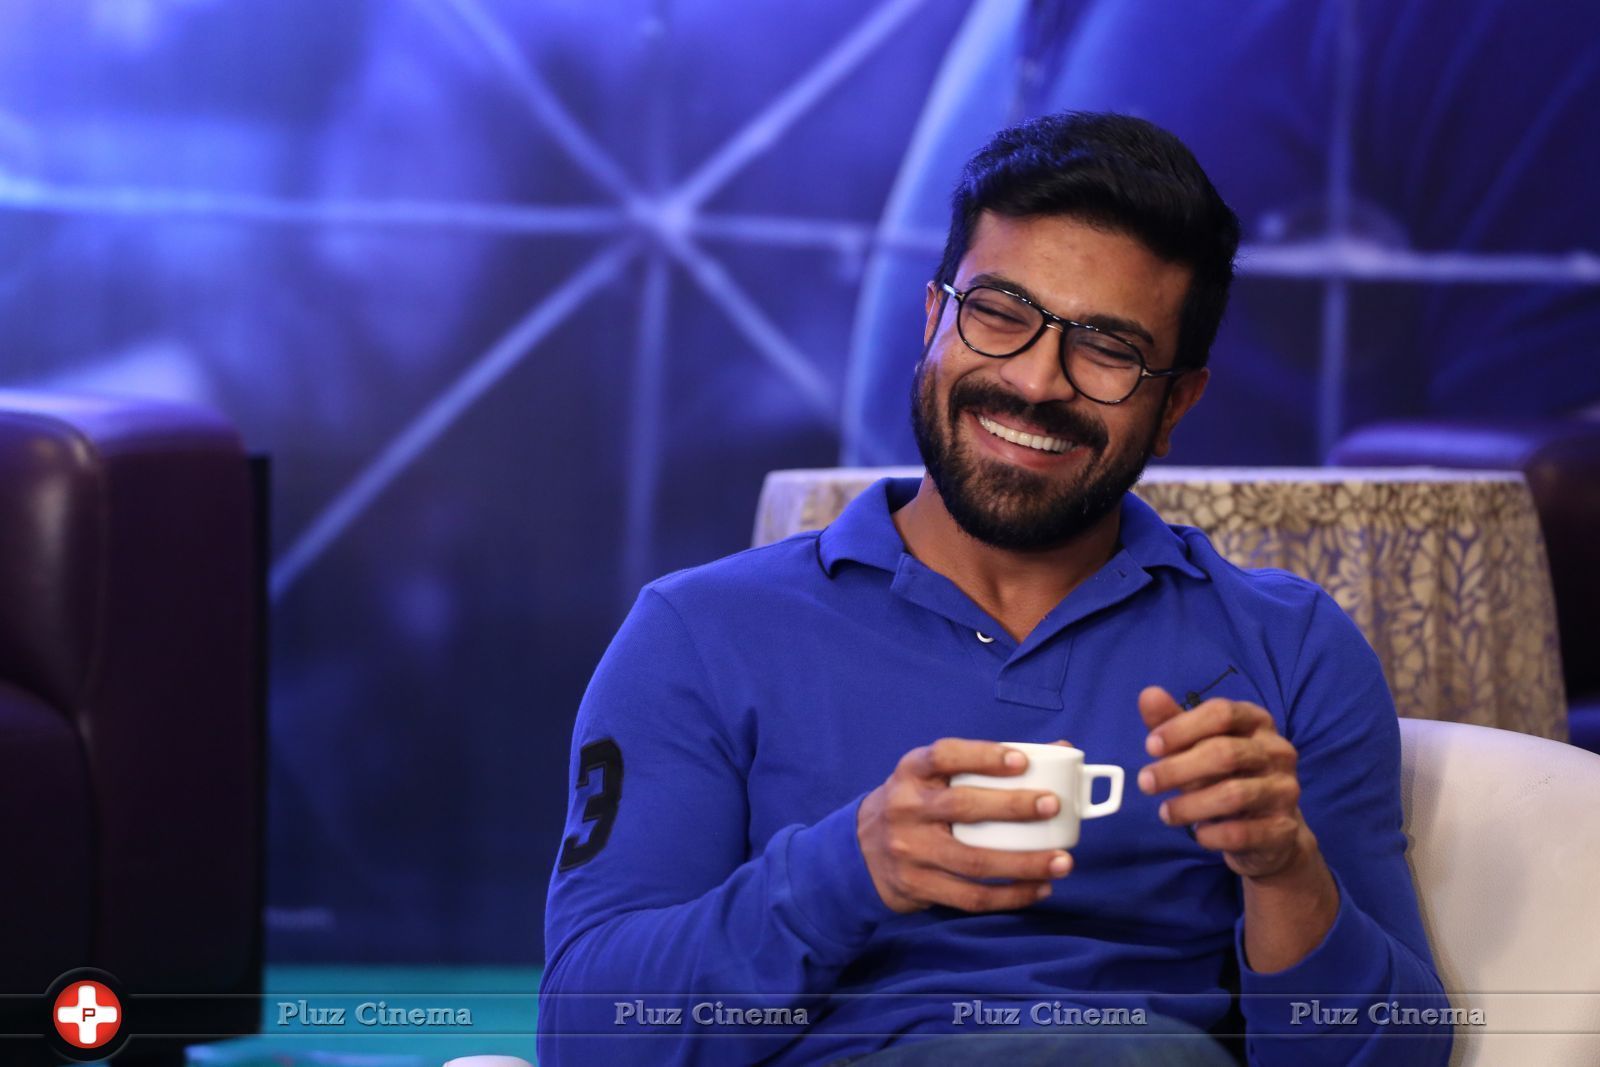 Ram Charan Interview For Dhruva Photos | Picture 1444660